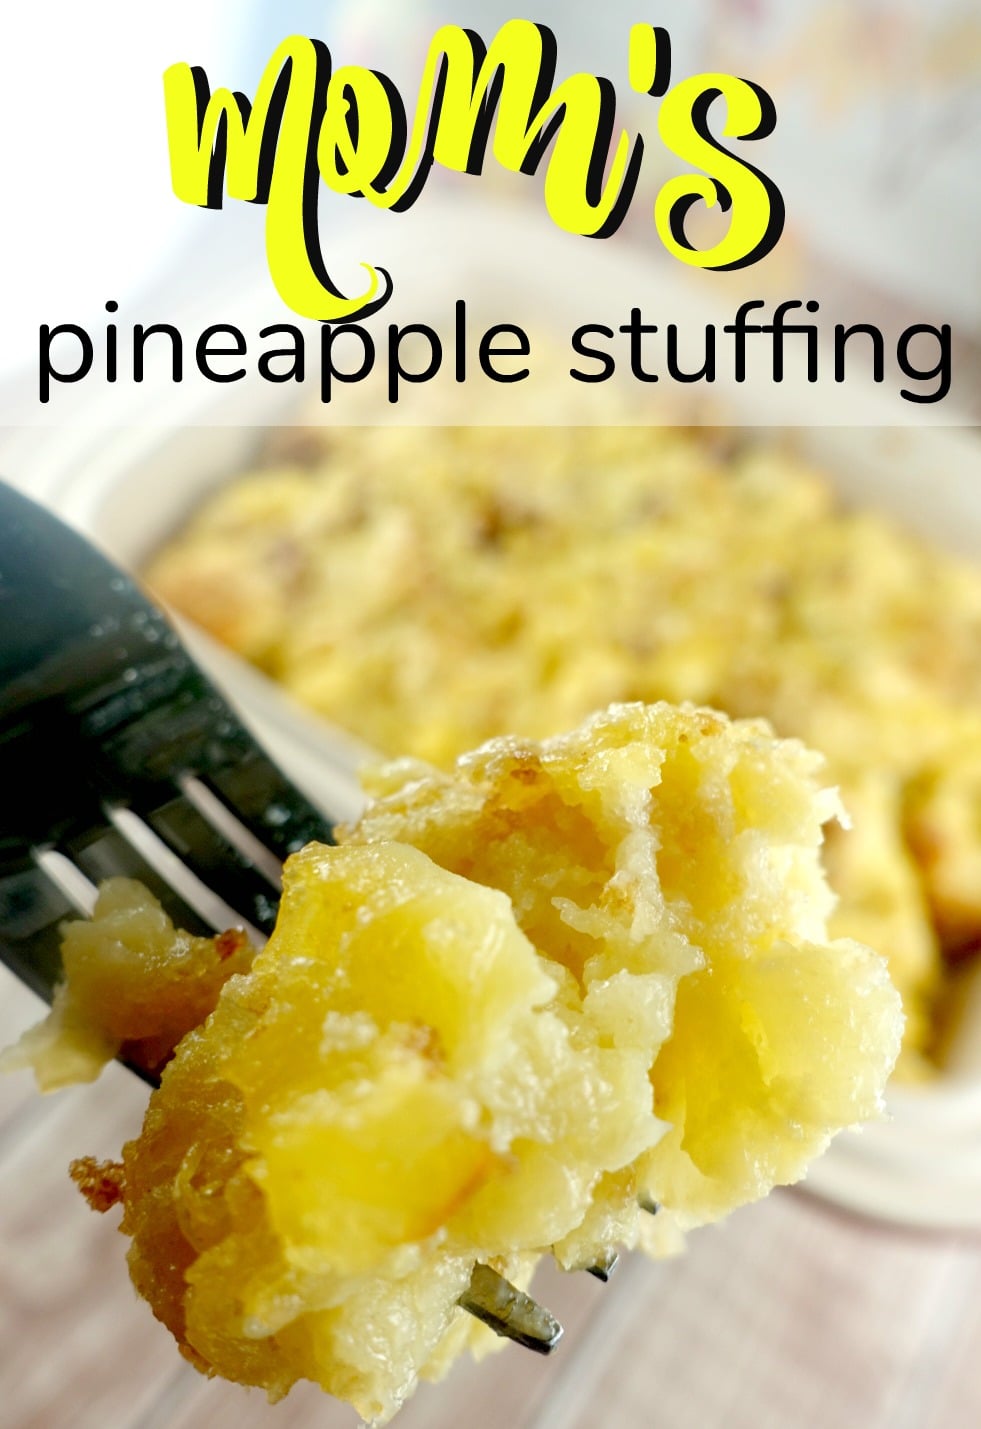 My Mom's Pineapple Stuffing is one of the tastiest dishes you'll have this holiday season! It's sweet and savory with thick, soft bread, pineapple, eggs and butter. It's almost like a bread pudding - but yet - also like a stuffing! Great with ham or turkey and a must-have for your holiday menu! via @foodhussy